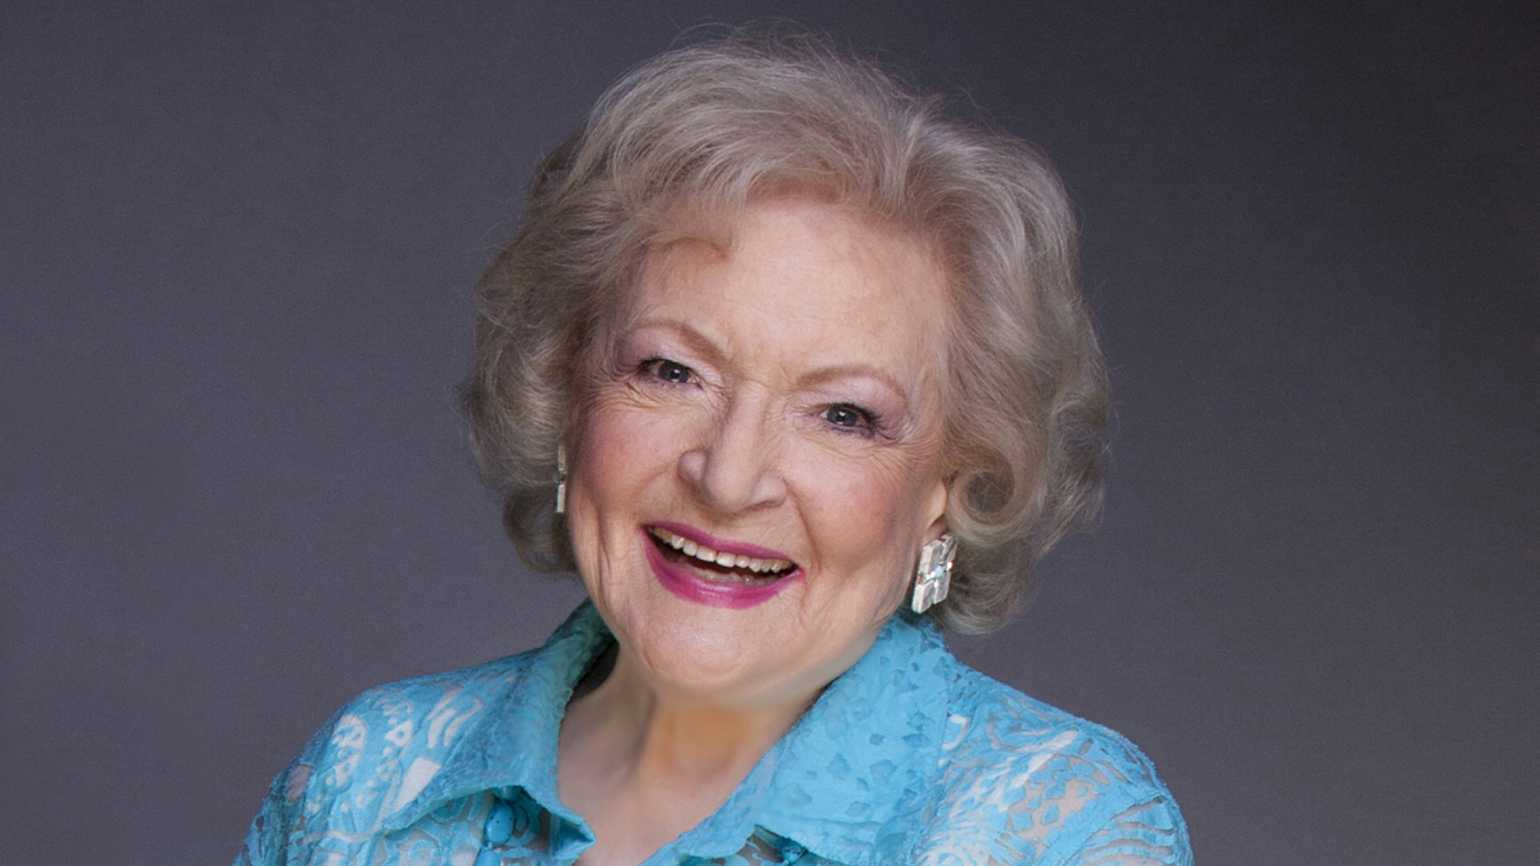 ...including an as-yet-untitled Christmas movie starring 98-year-old Betty White...